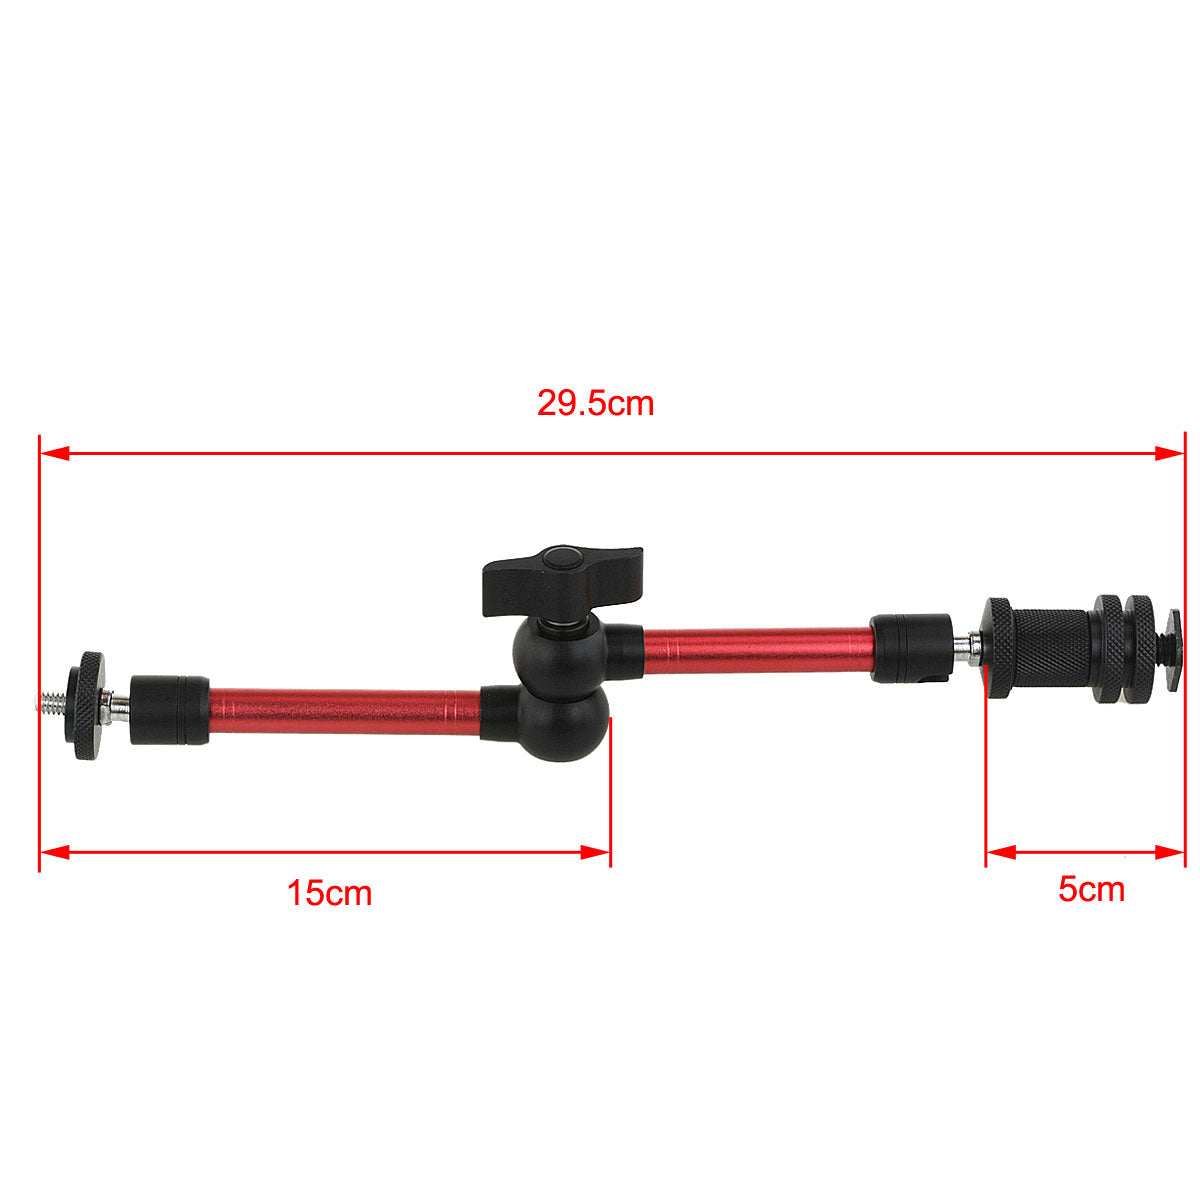 Haoge 11 Inch Adjustable Friction Articulating Magic Arm for DSLR Camera LCD Monitor LED Light Red